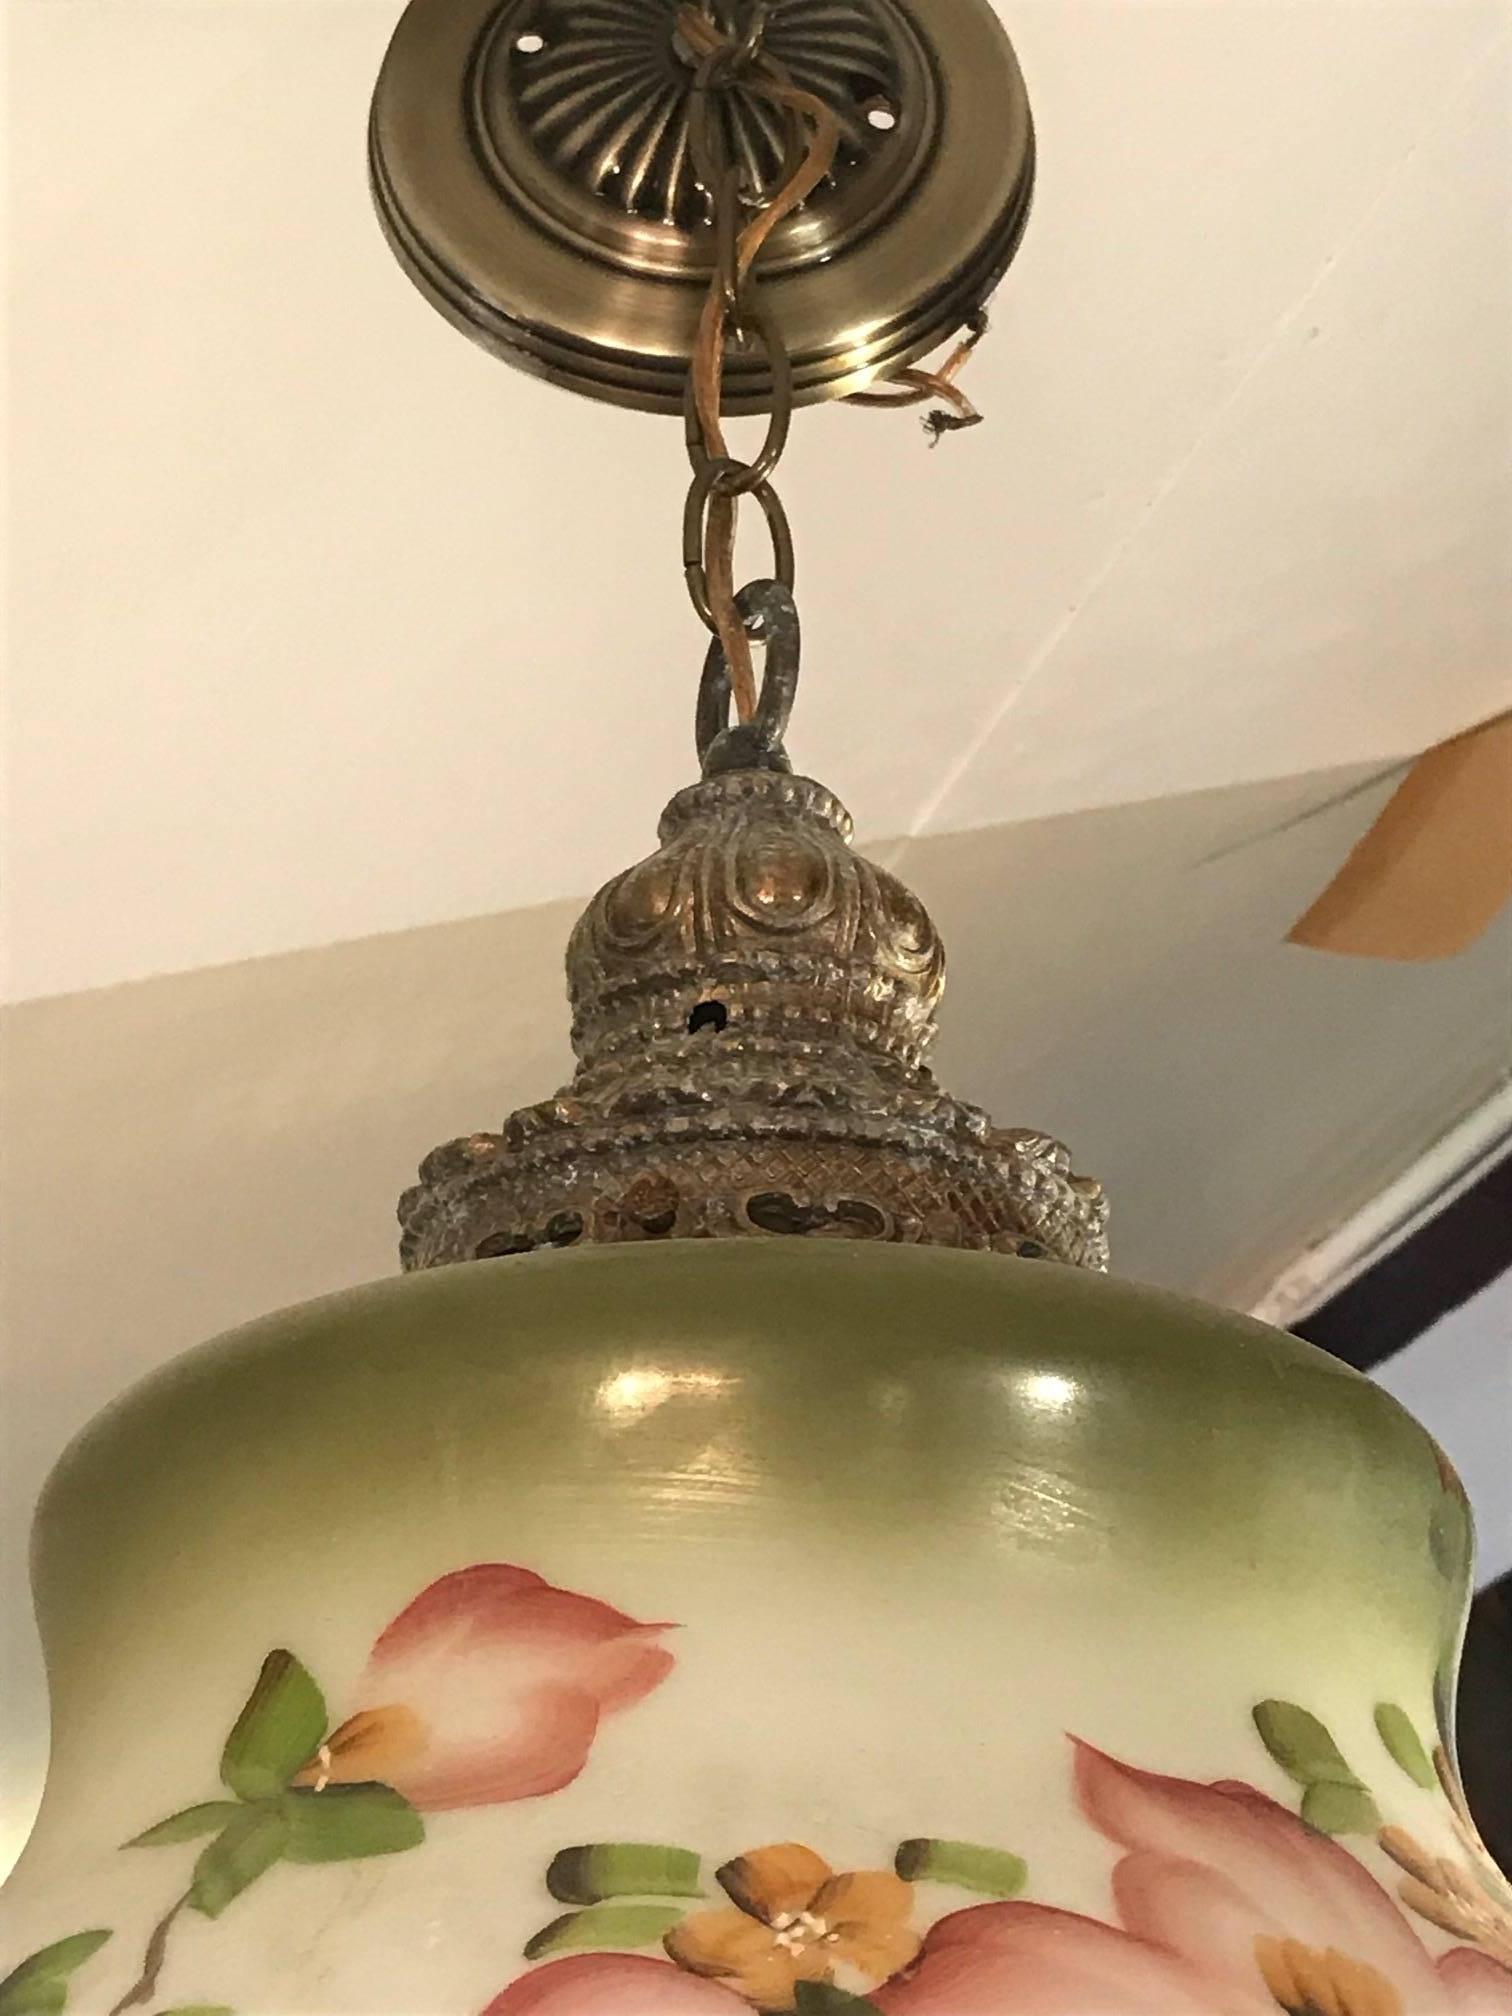 Very pretty hand-painted glass pendant light fixture having ornate brass elements on both top and bottom.